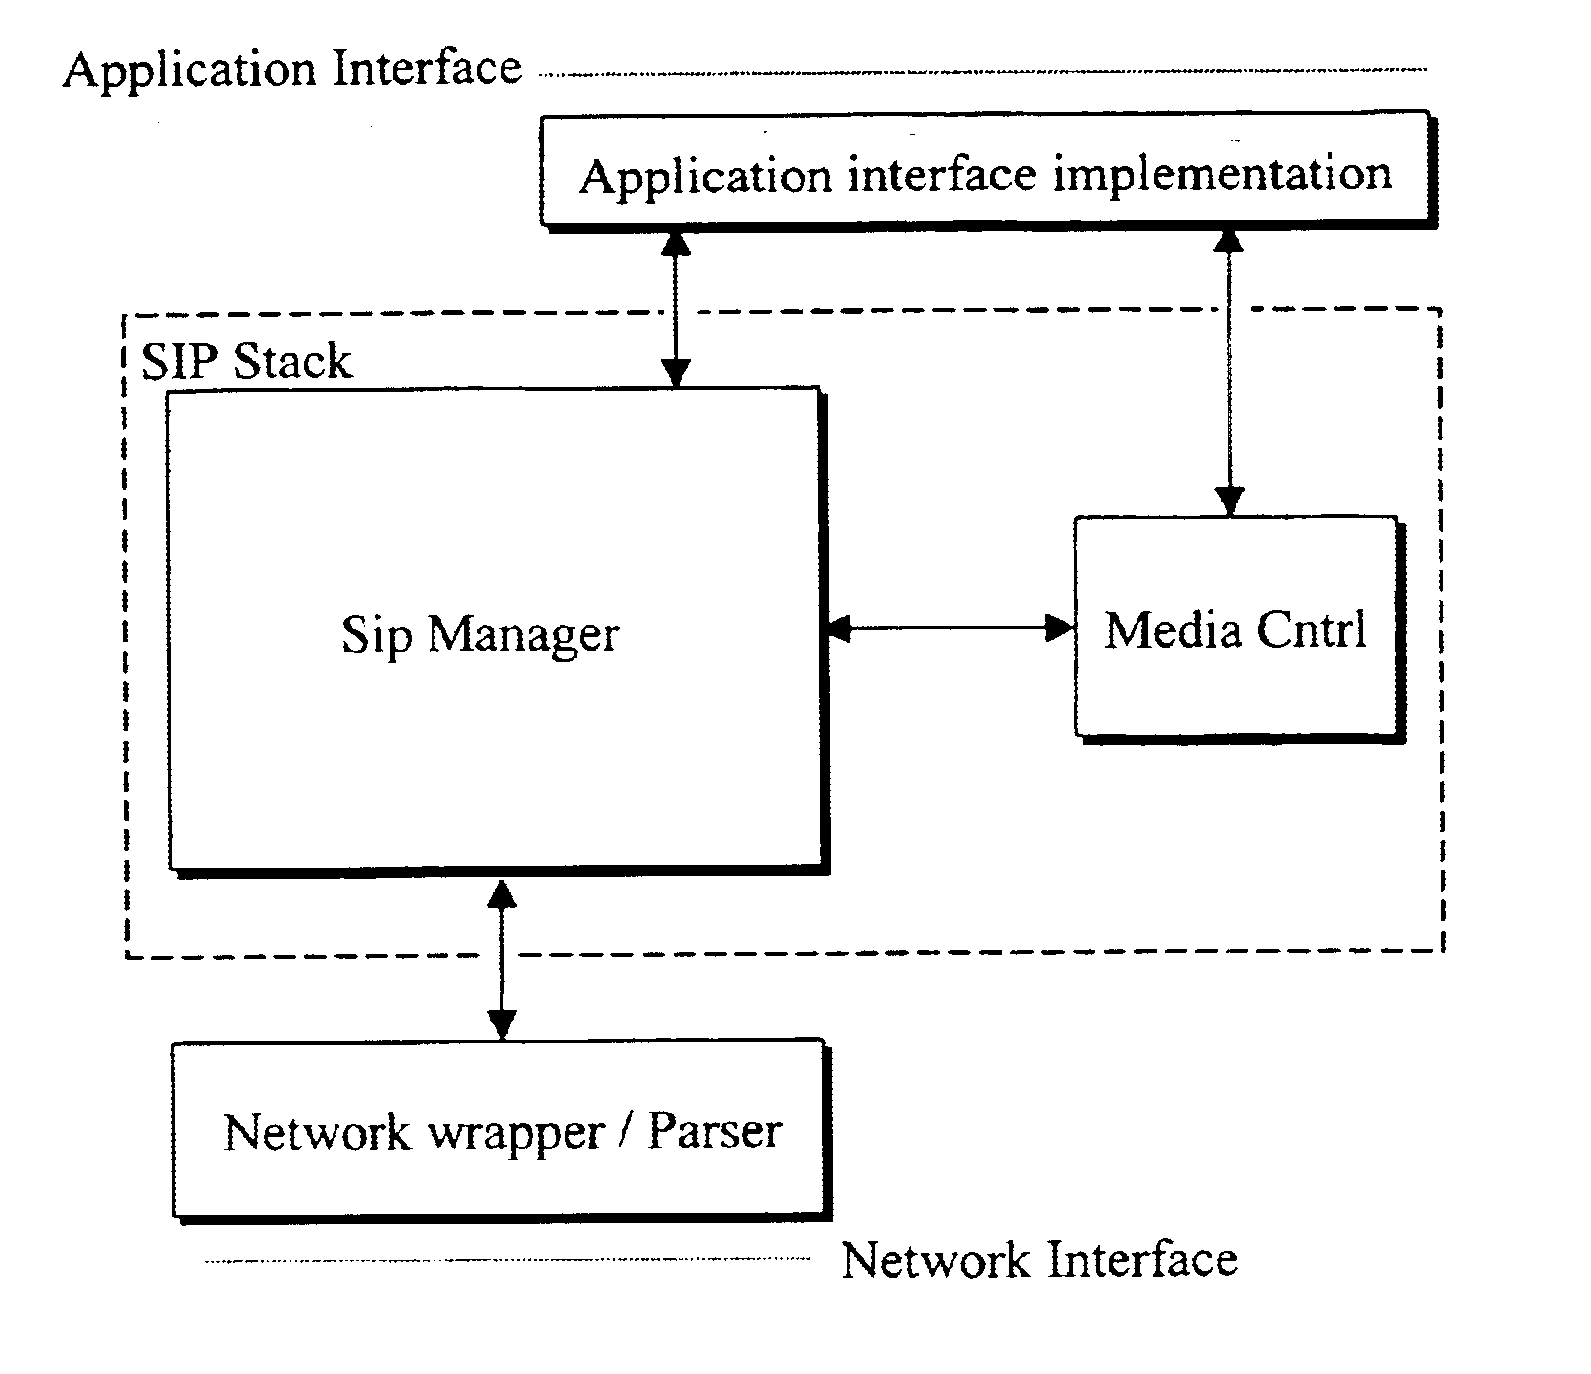 VoIP terminal security module, SIP stack with security manager, system and security methods